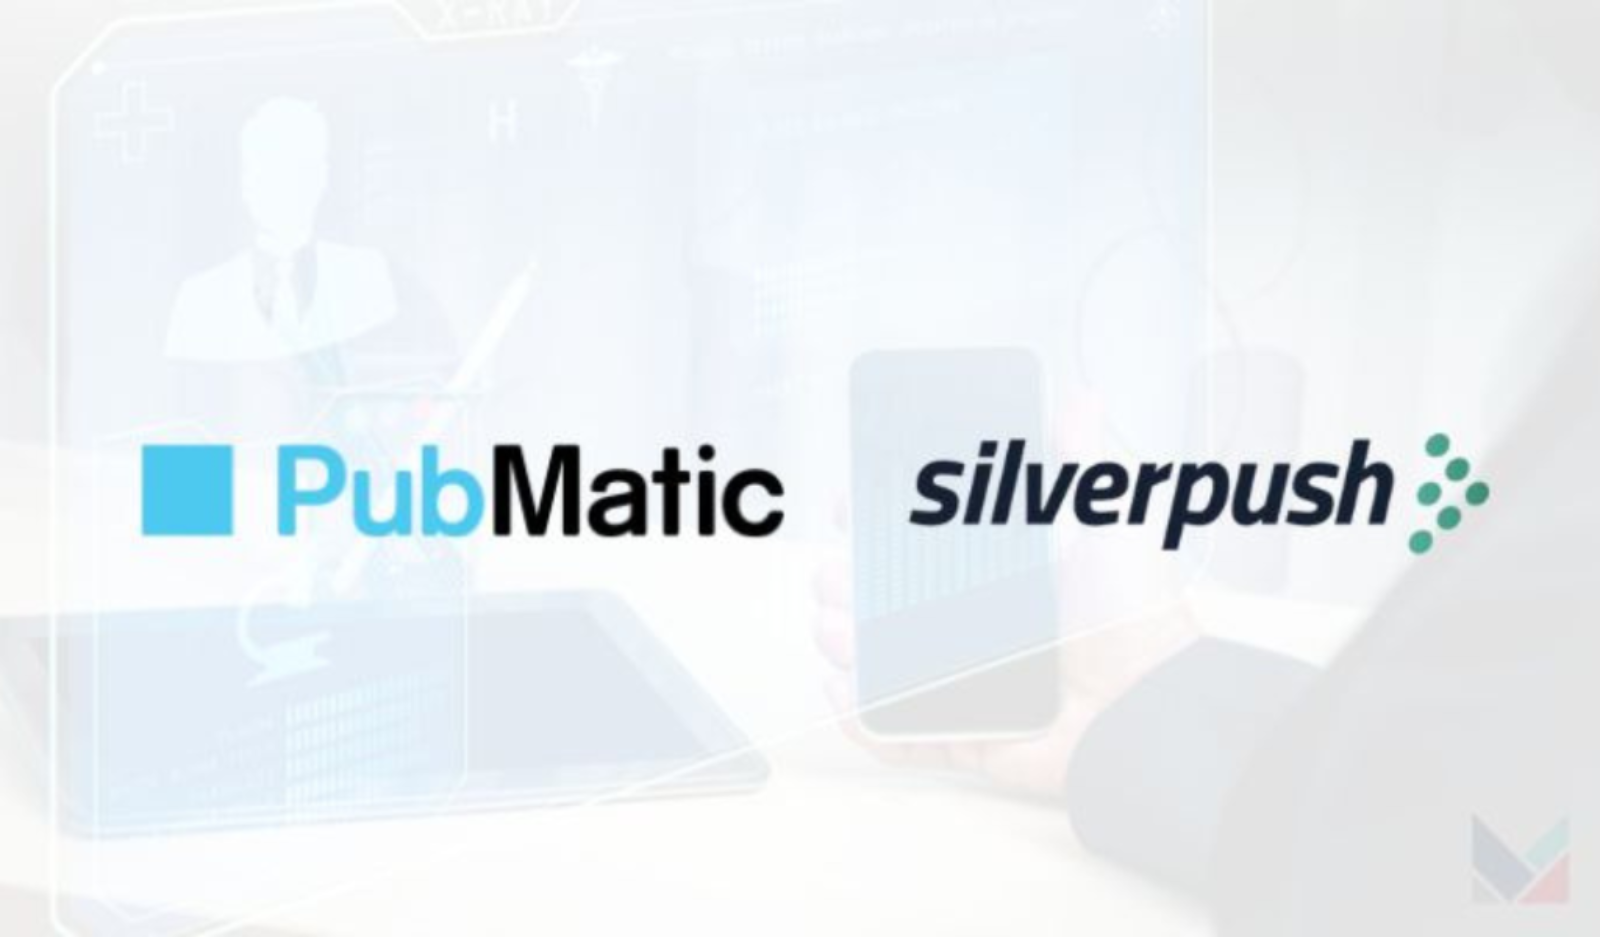 Silverpush and PubMatic join hands for better digital advertising in APAC